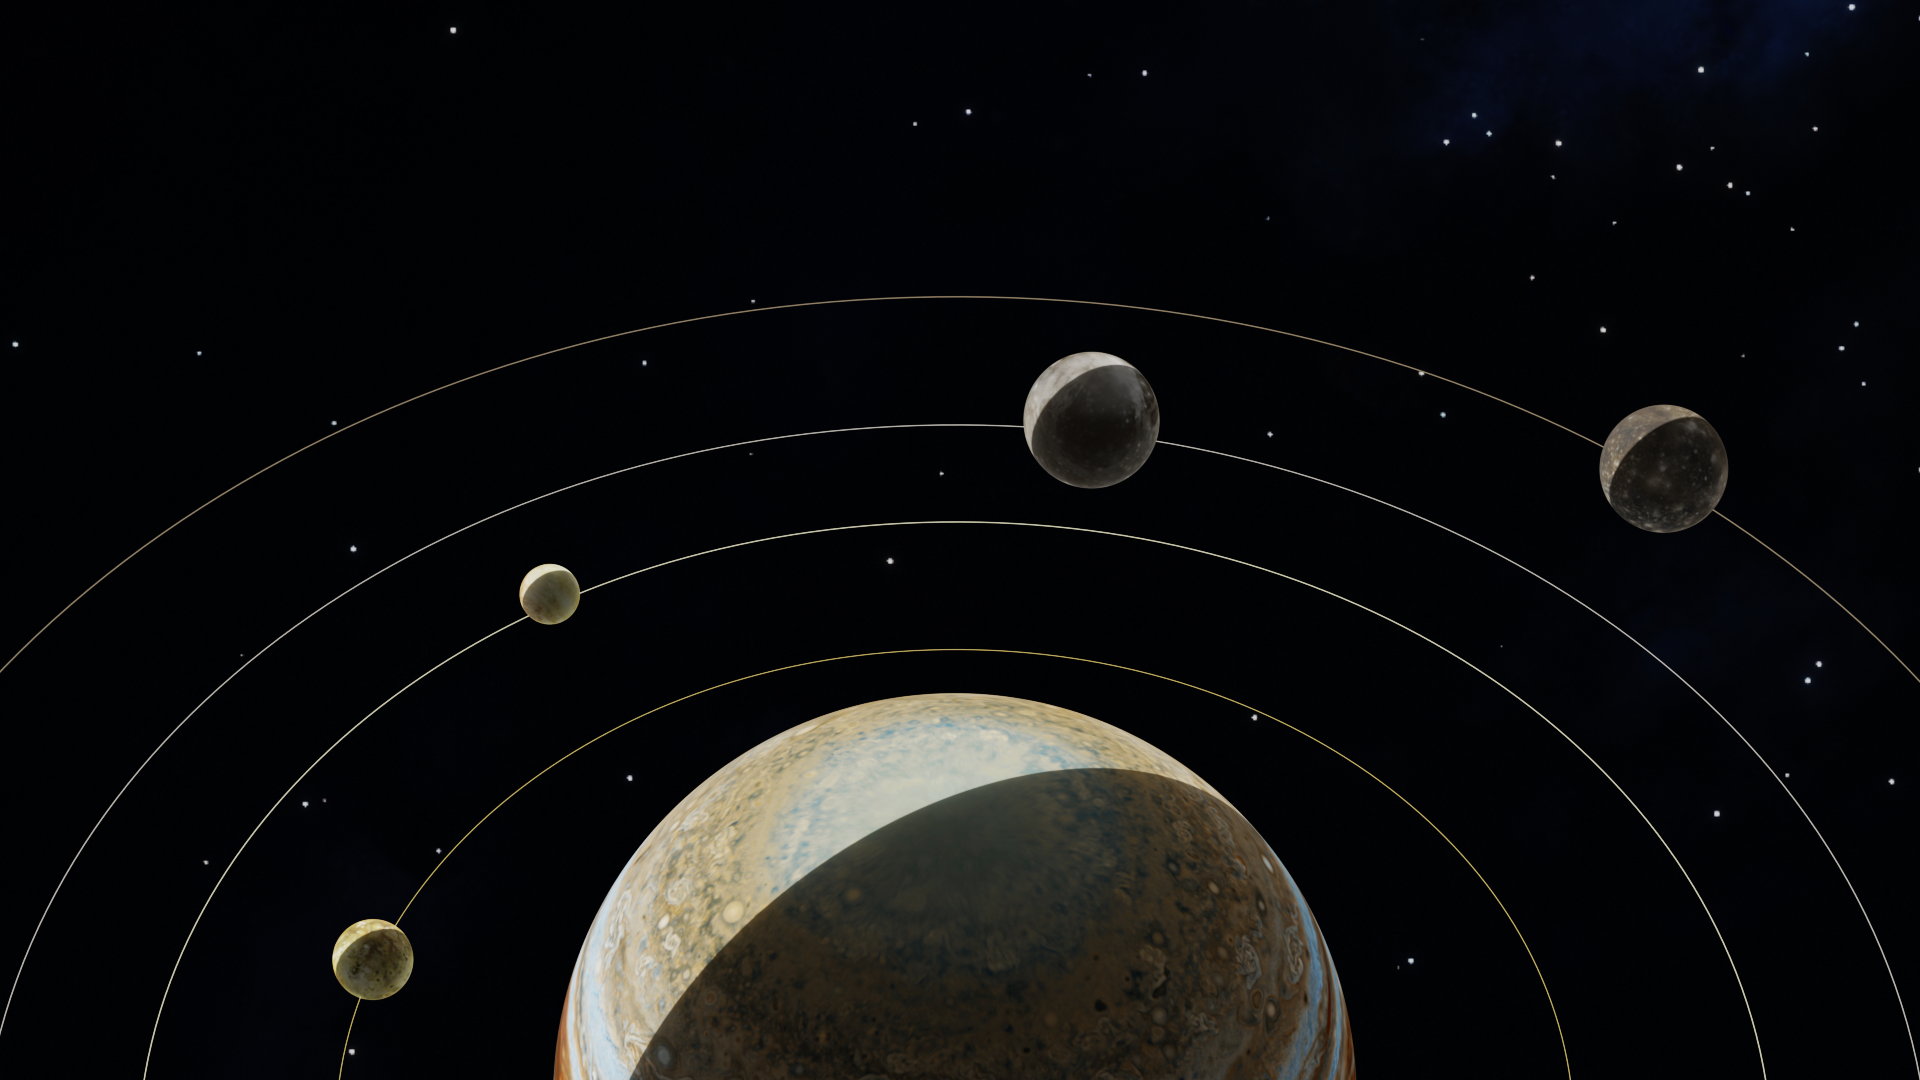 Galilean Moons: The Four Largest Moons Of Jupiter